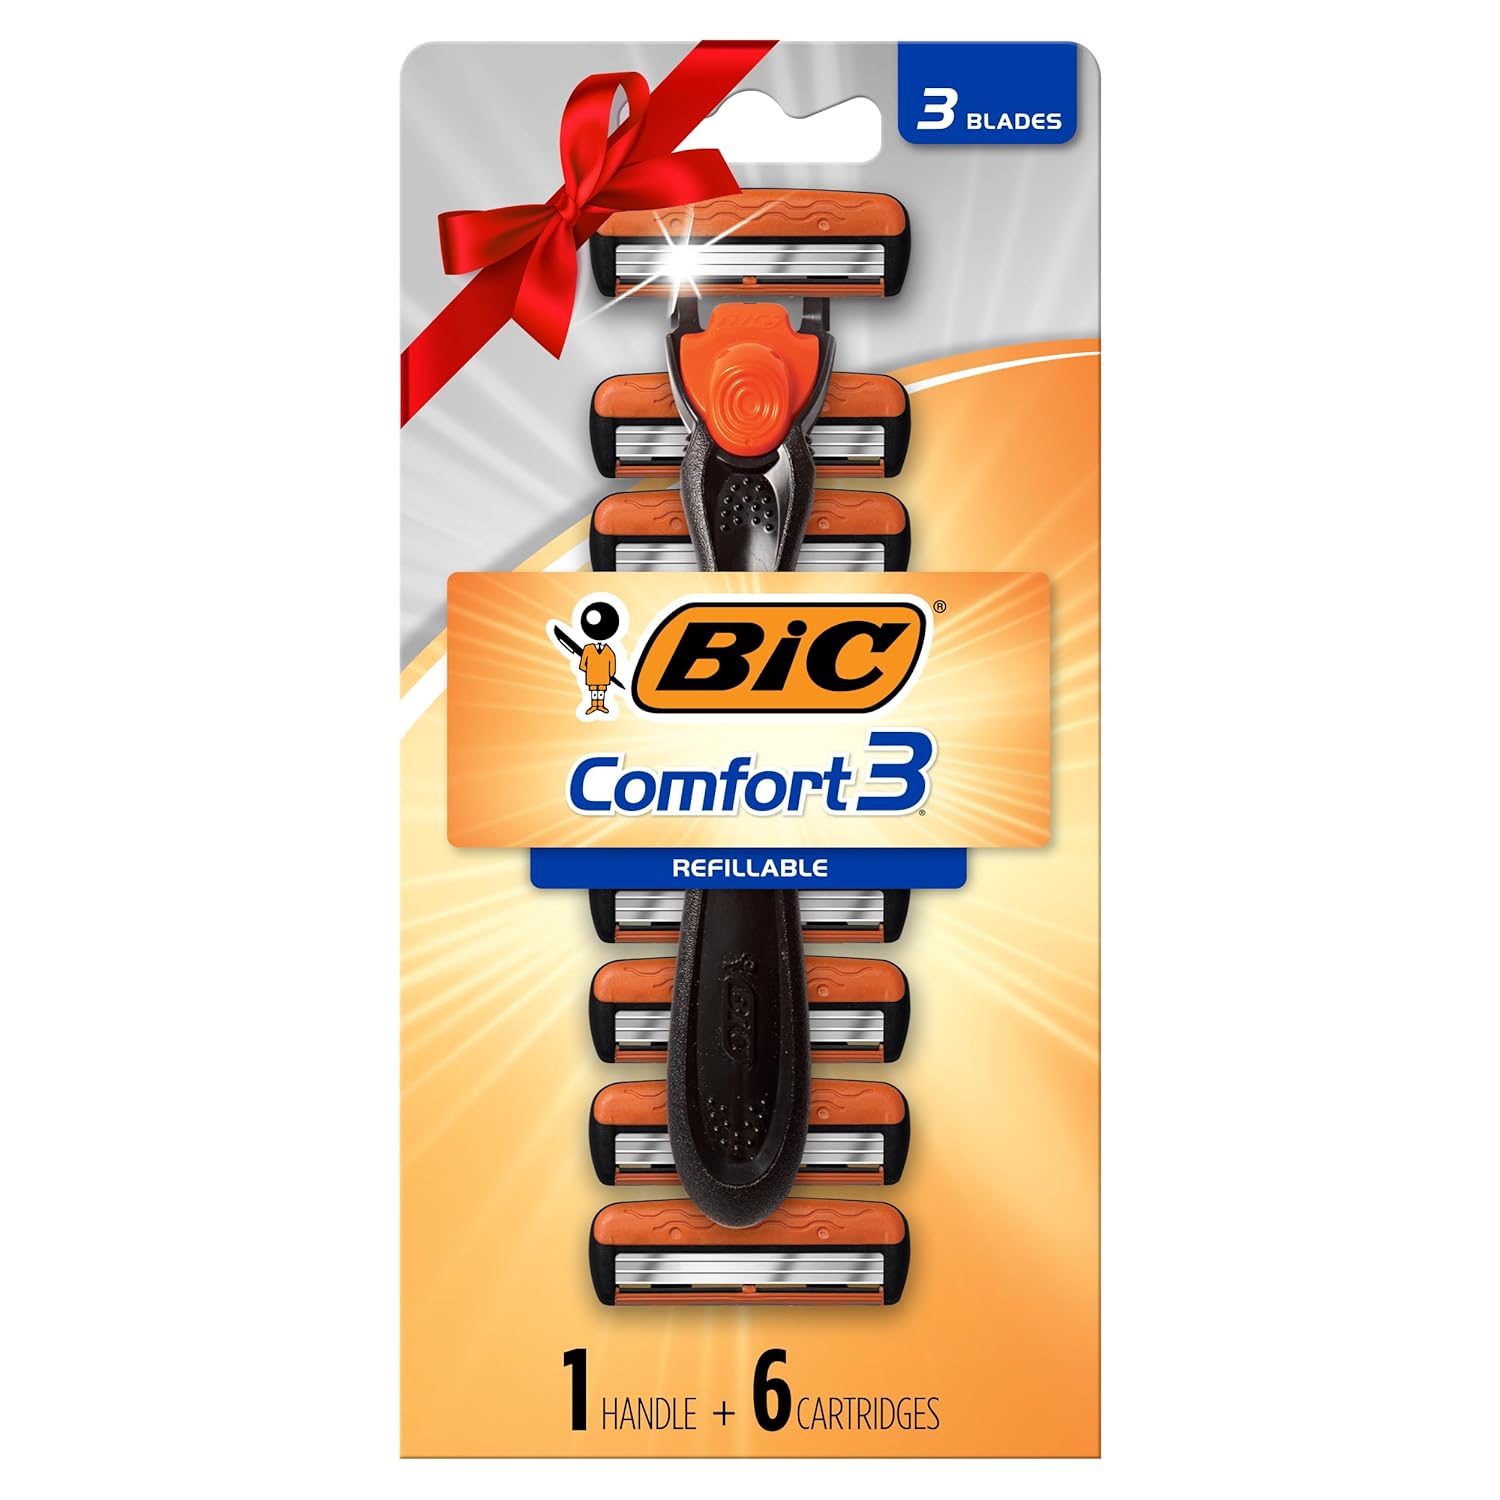 BIC Comfort 3 Hybrid Men's Disposable Razor (1 Handle w/ 6 Cartridges) $3.53 w/ S&S + Free Shipping w/ Prime or on orders $35+